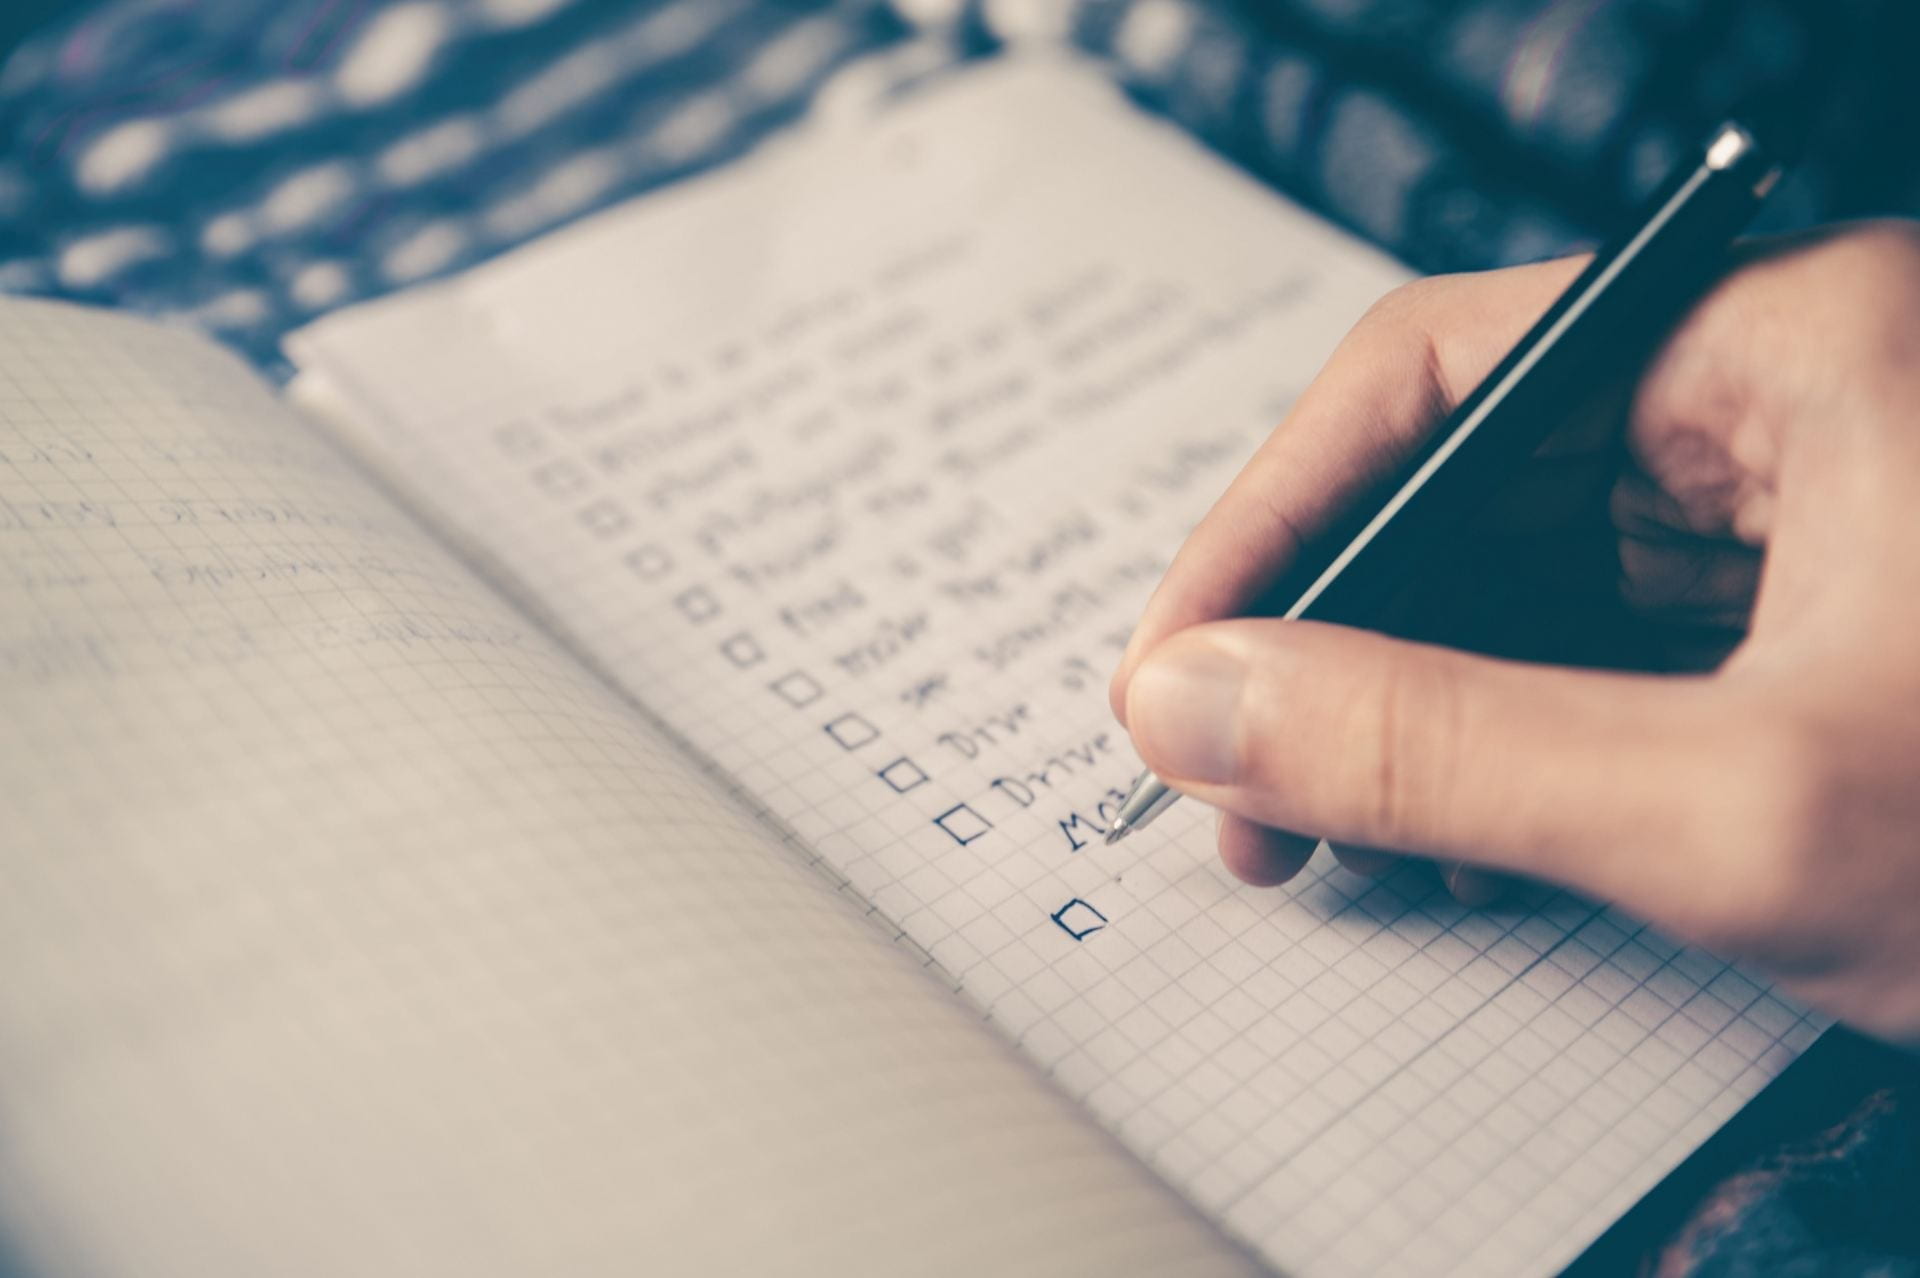 Somebody creates a checklist on grid paper with a pen